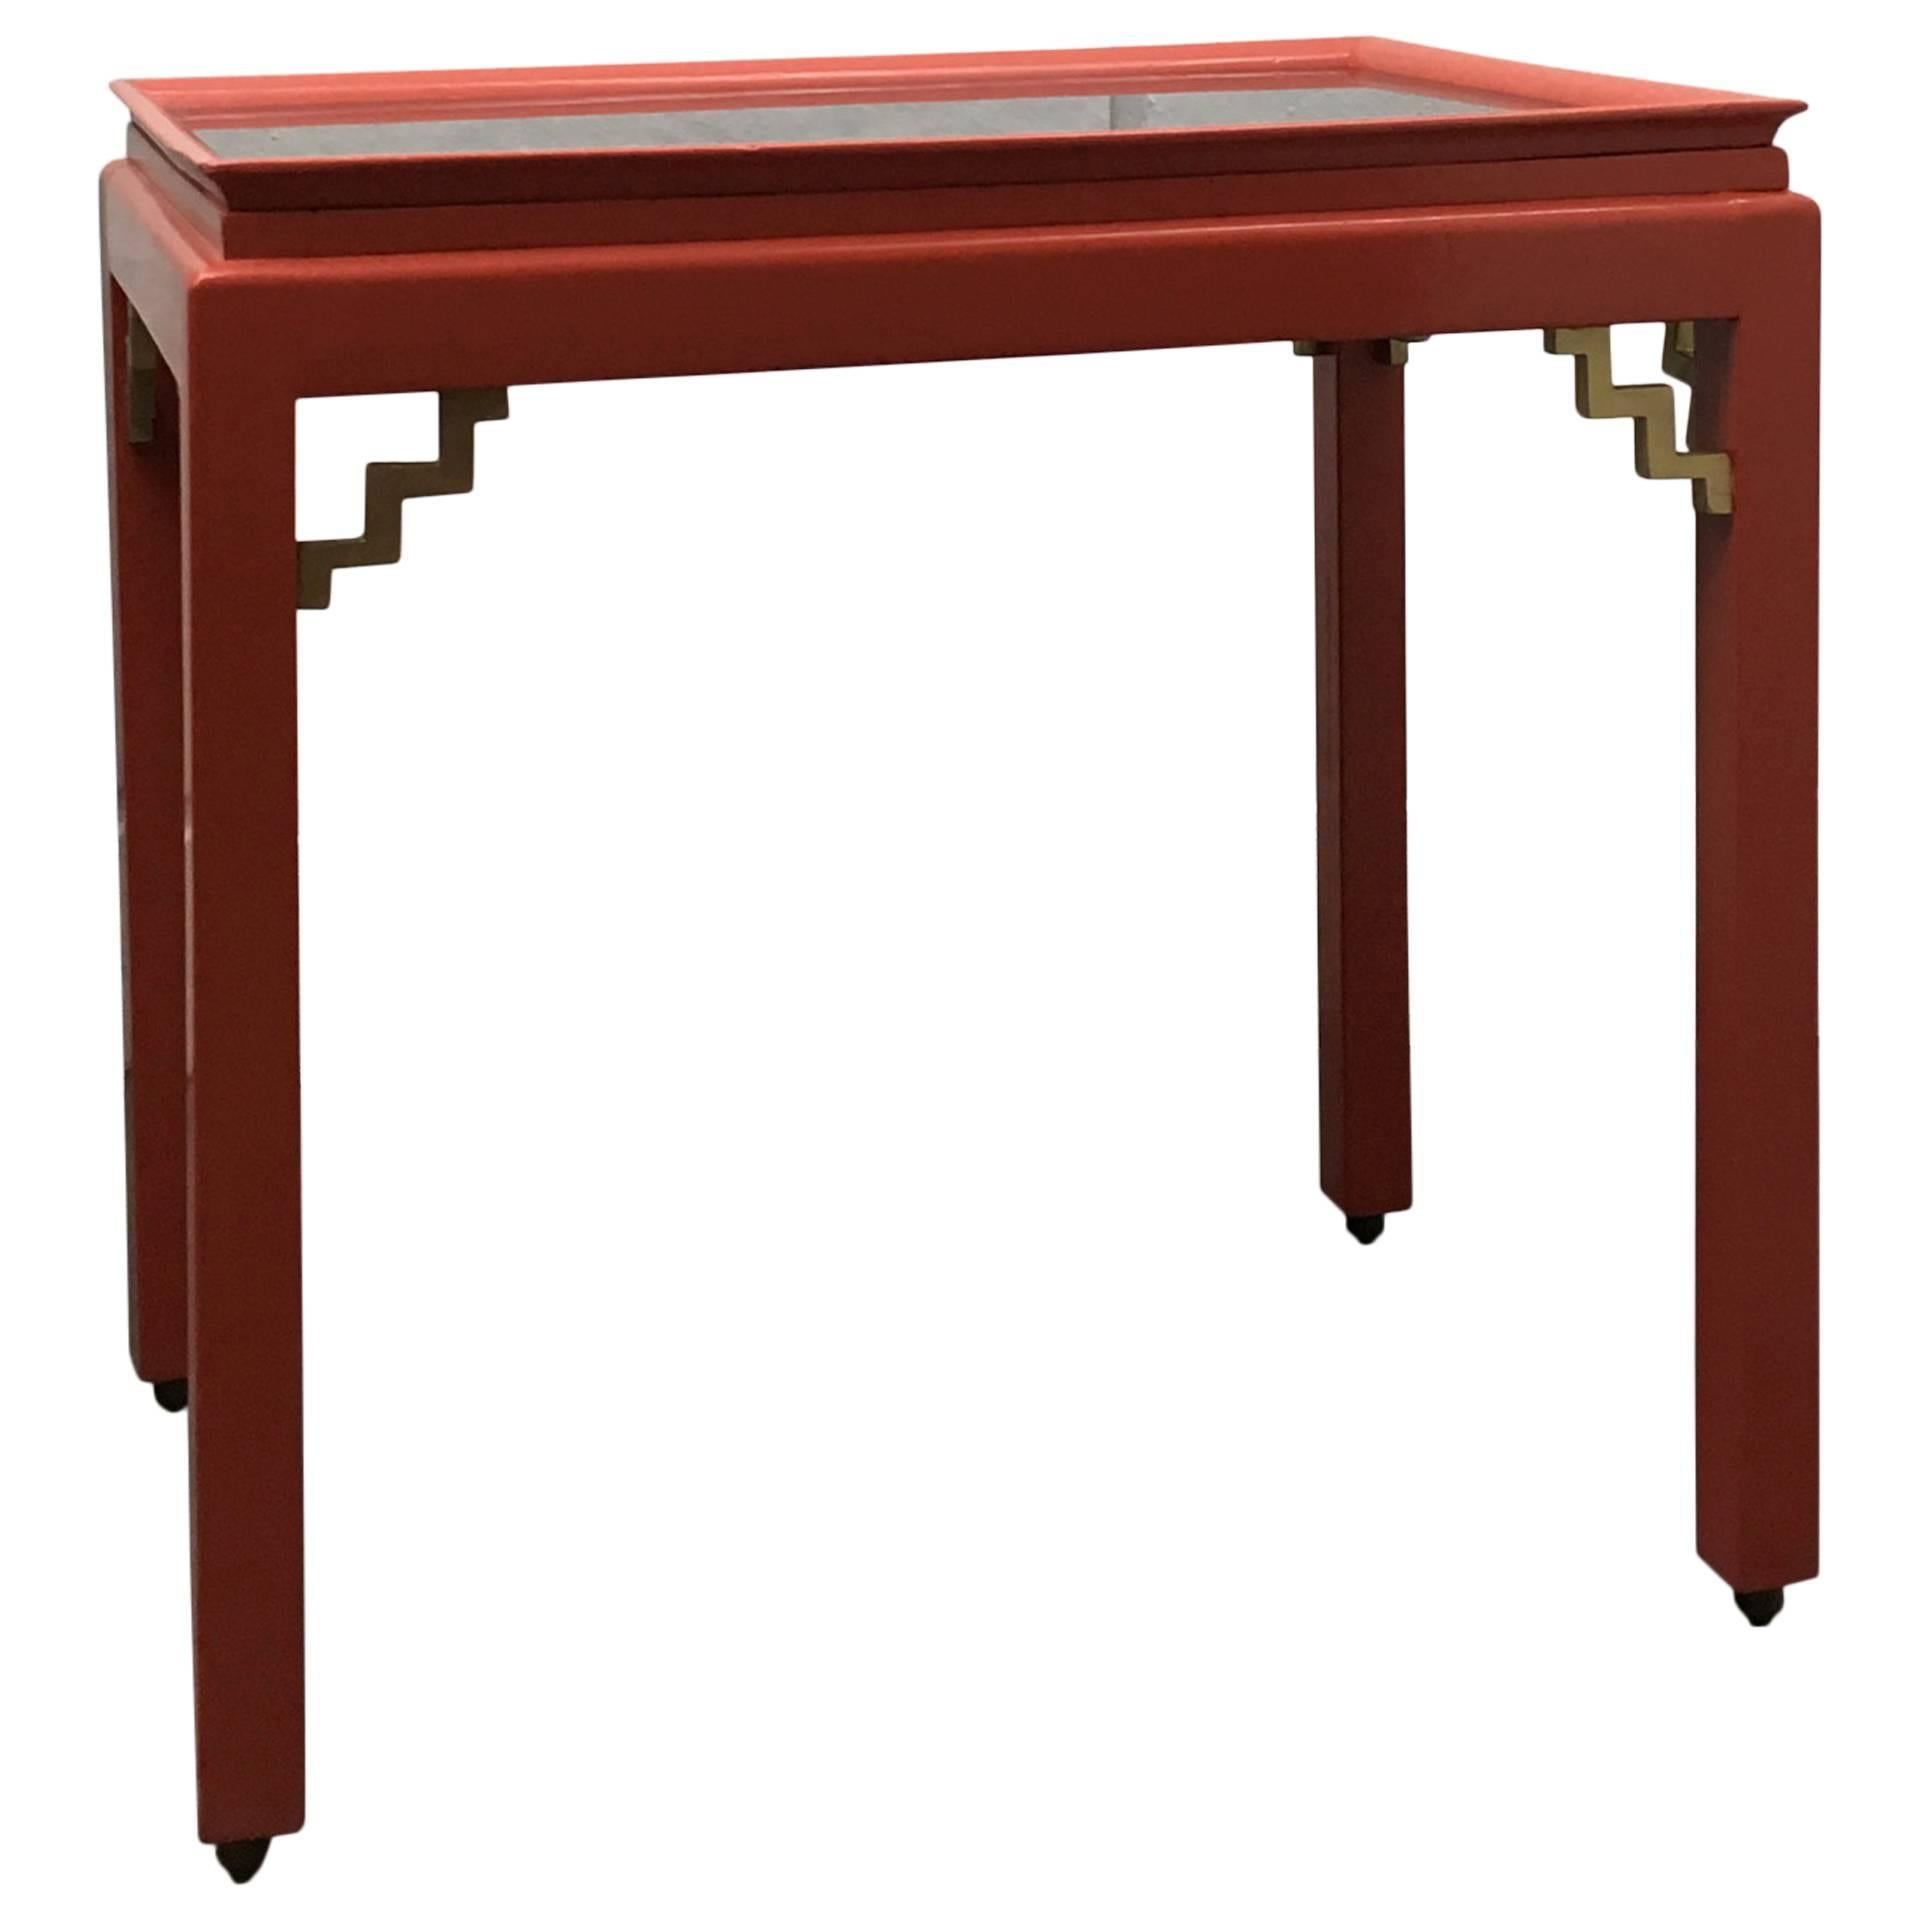 20th Century Chinoiserie Red Lacquer Sidetable